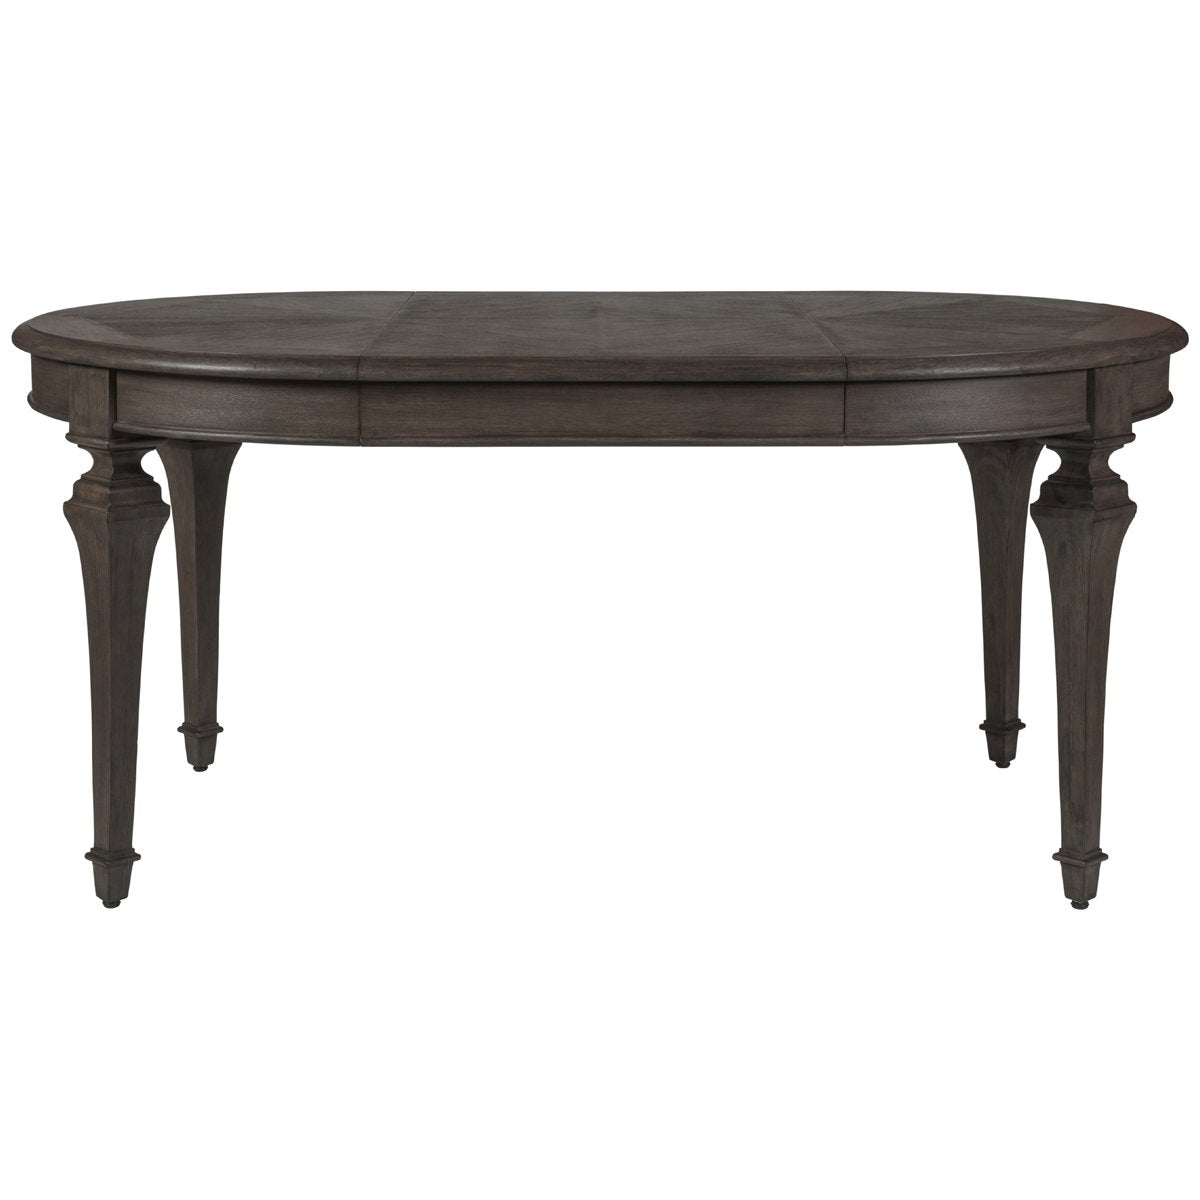 Artistica Home Aperitif Round Oval Dining Table 2000-870-39